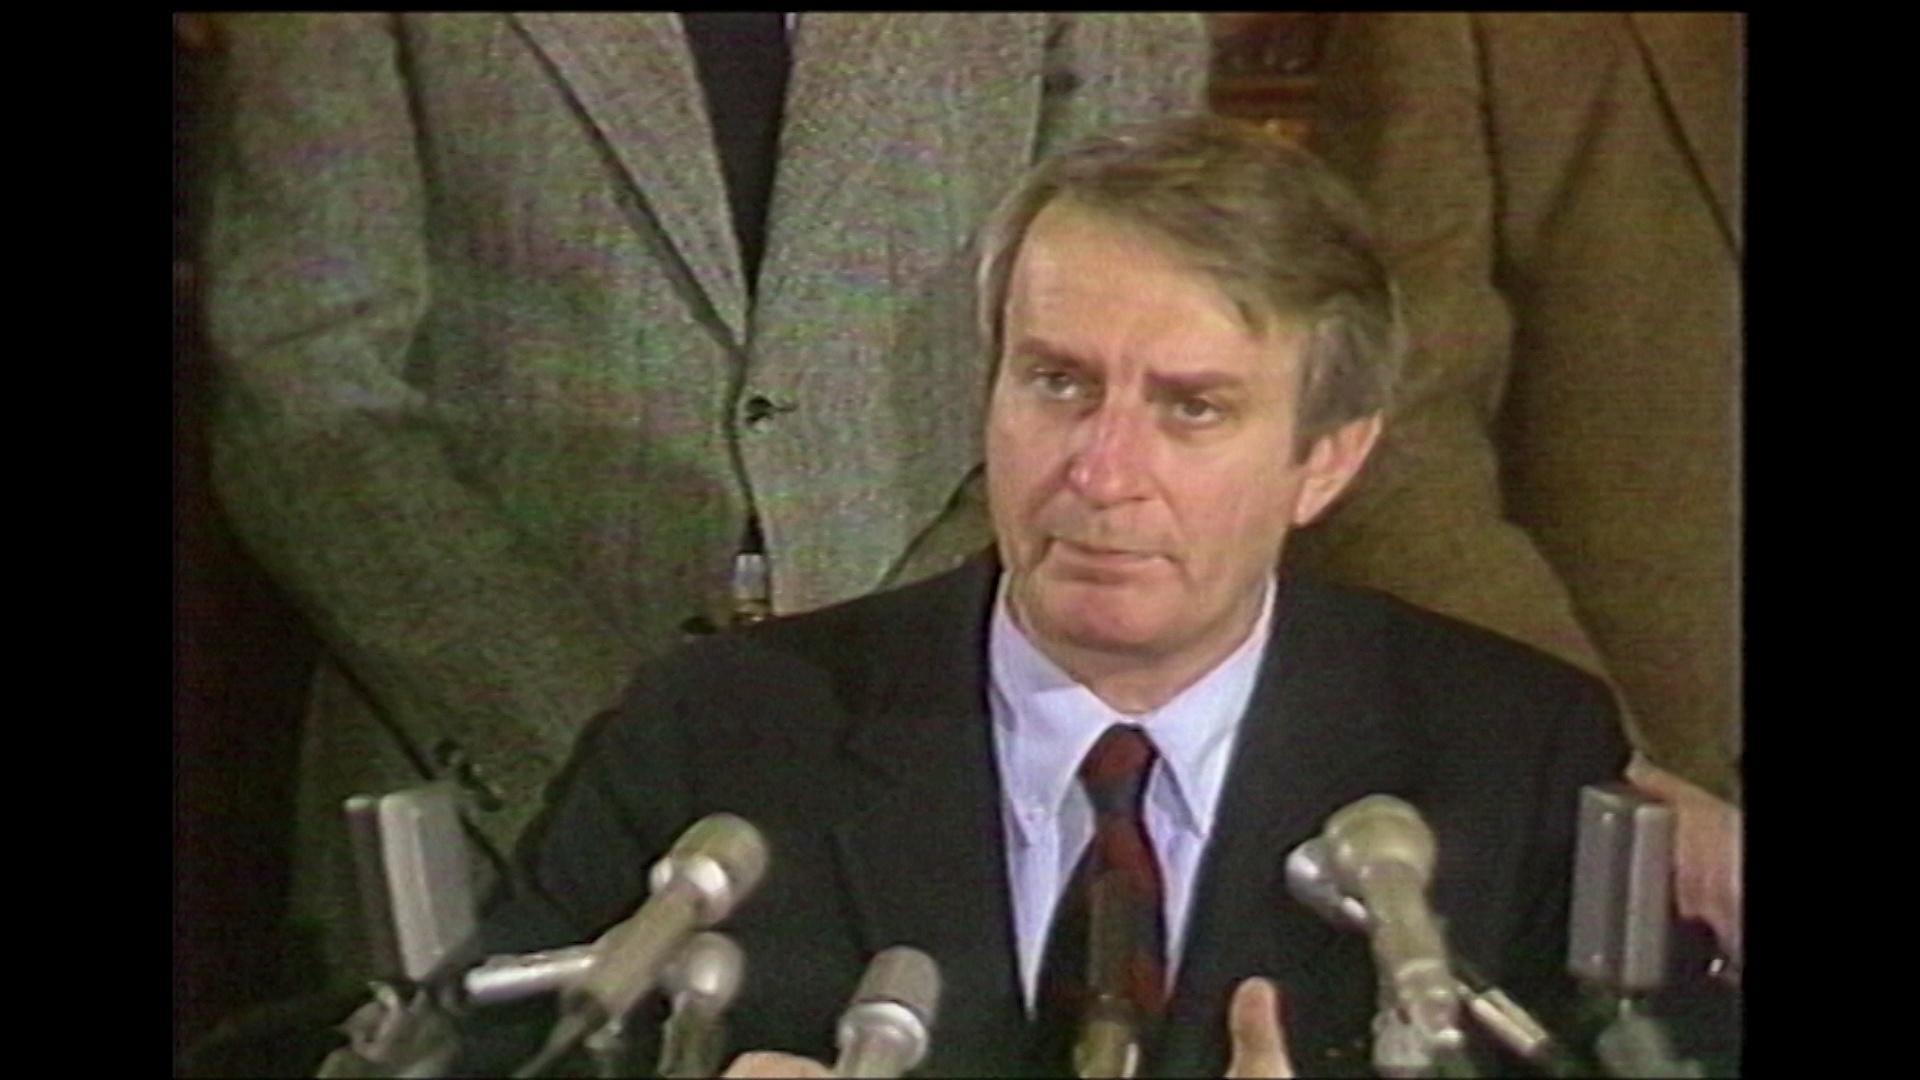 A still image from a video shows Tony Earl siting and speaking into several microphones with other people standing in the background.